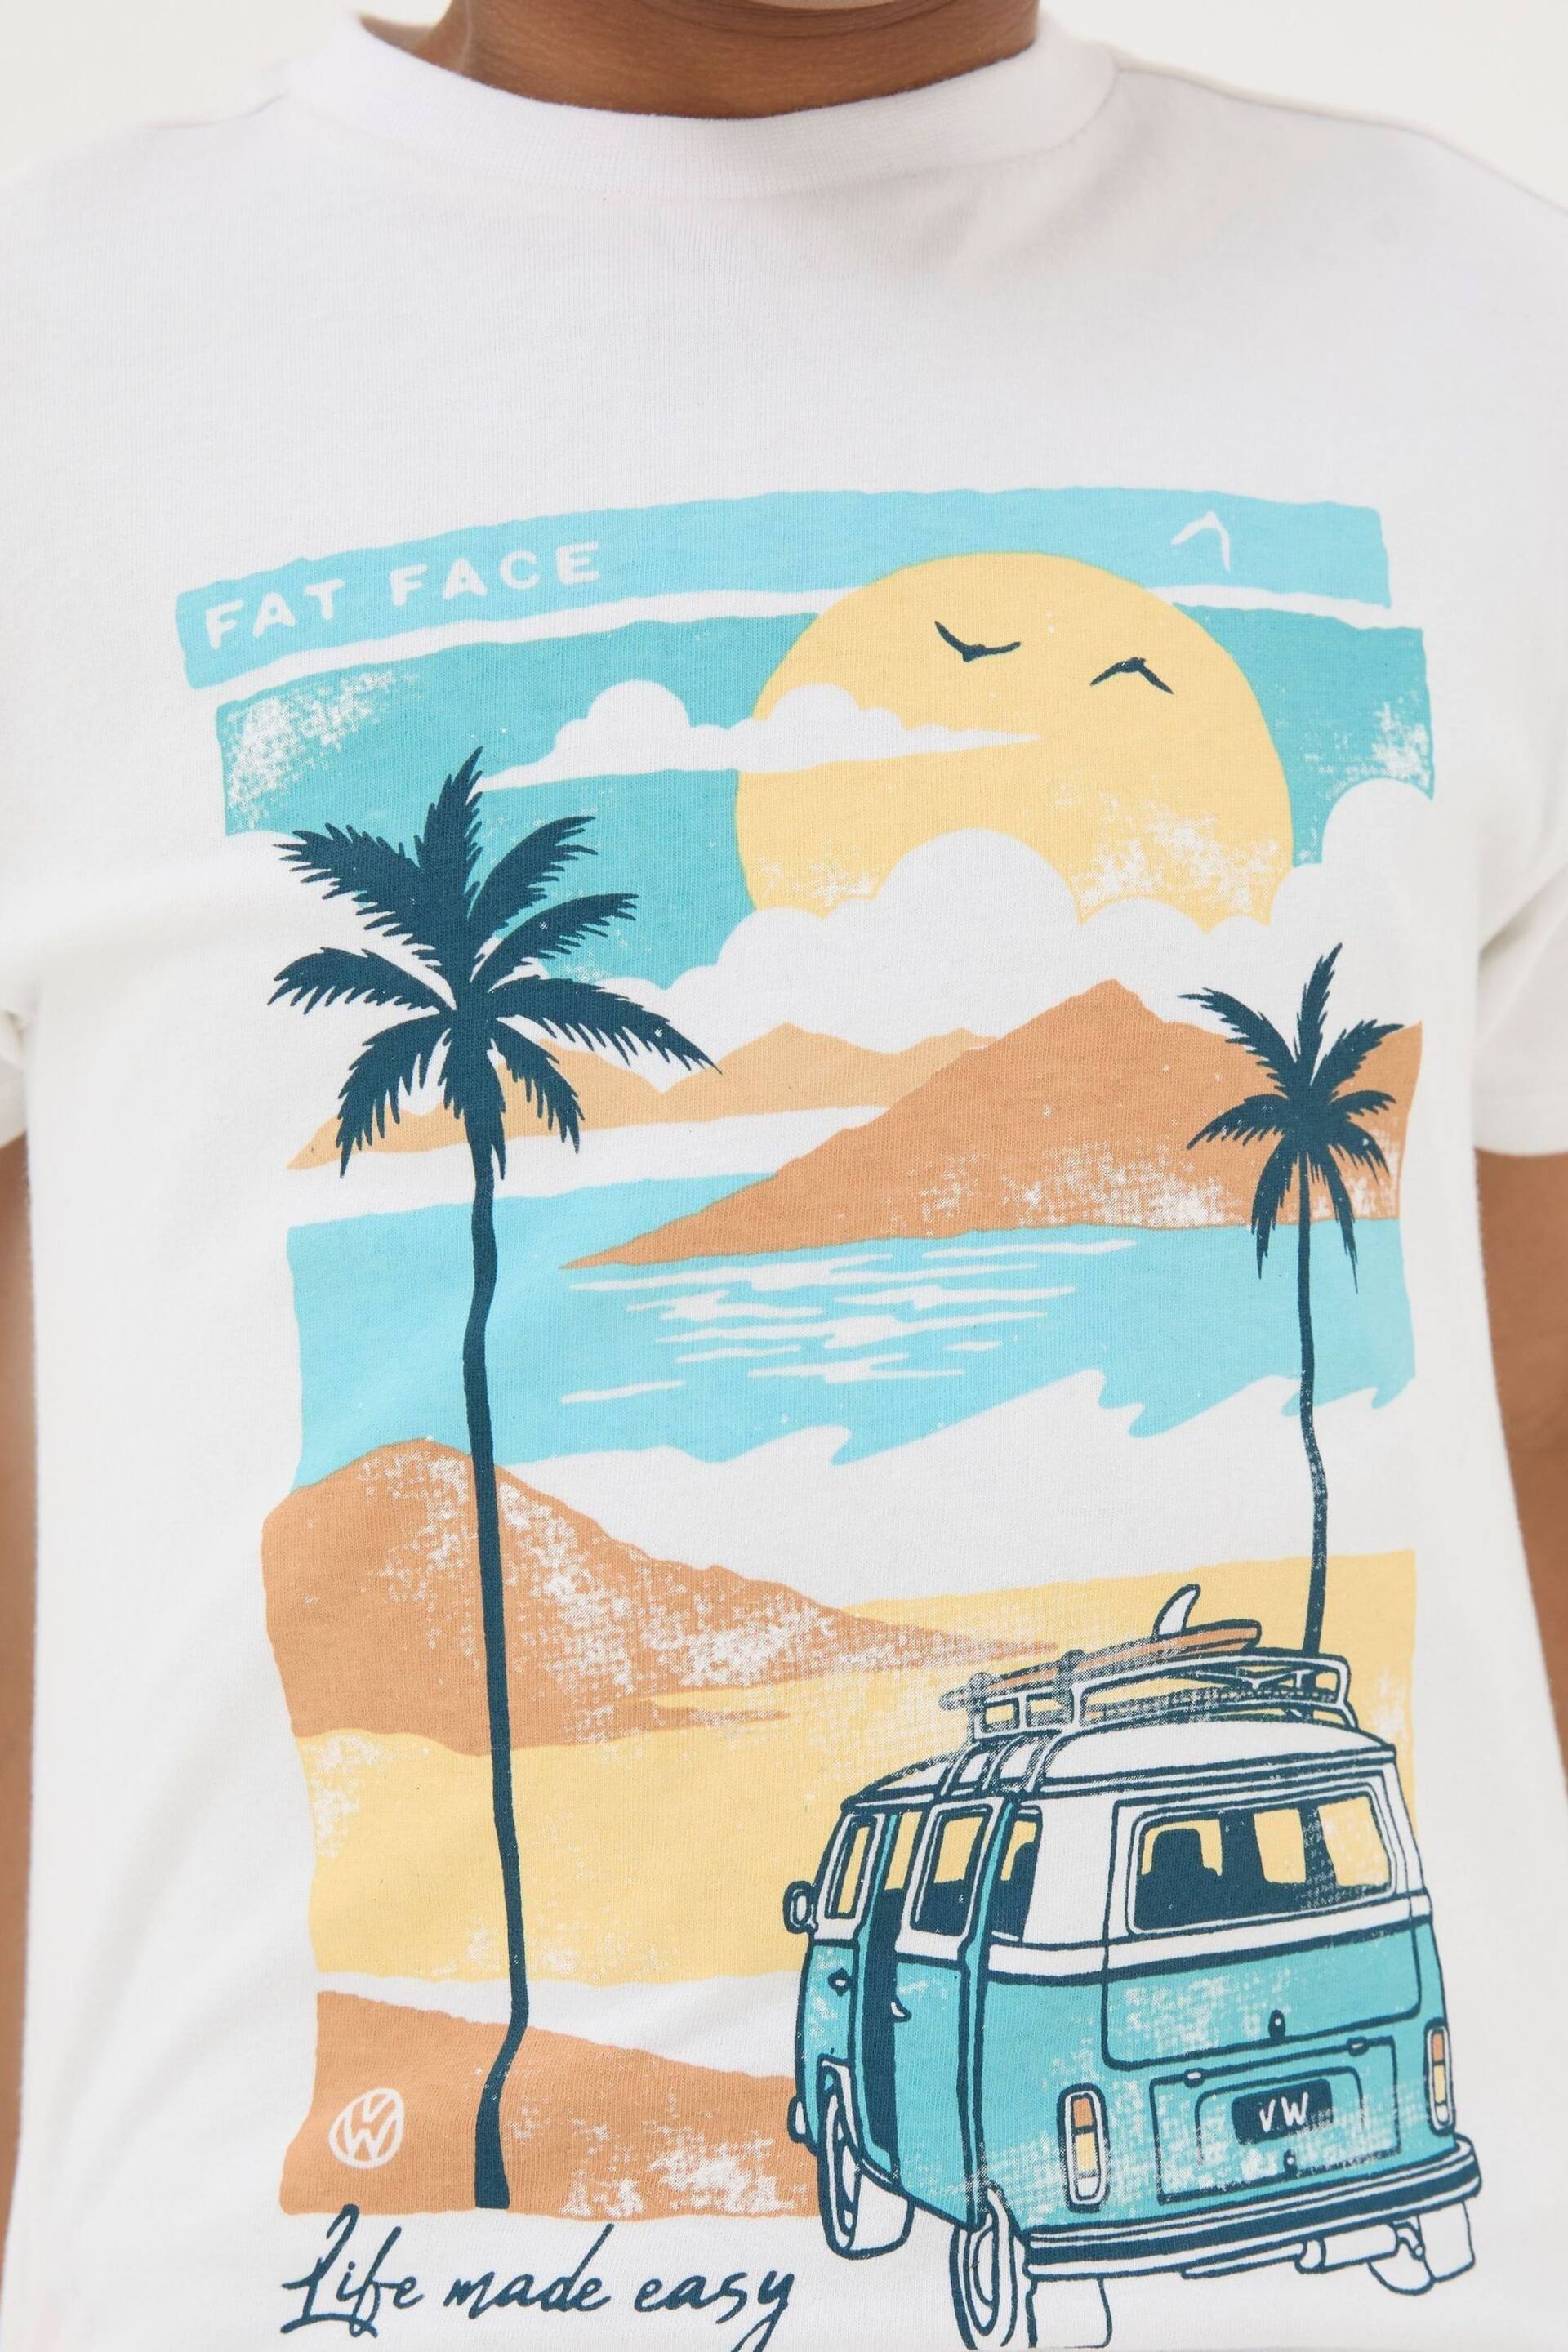 FatFace White VW Summer Graphic T-Shirt - Image 3 of 4